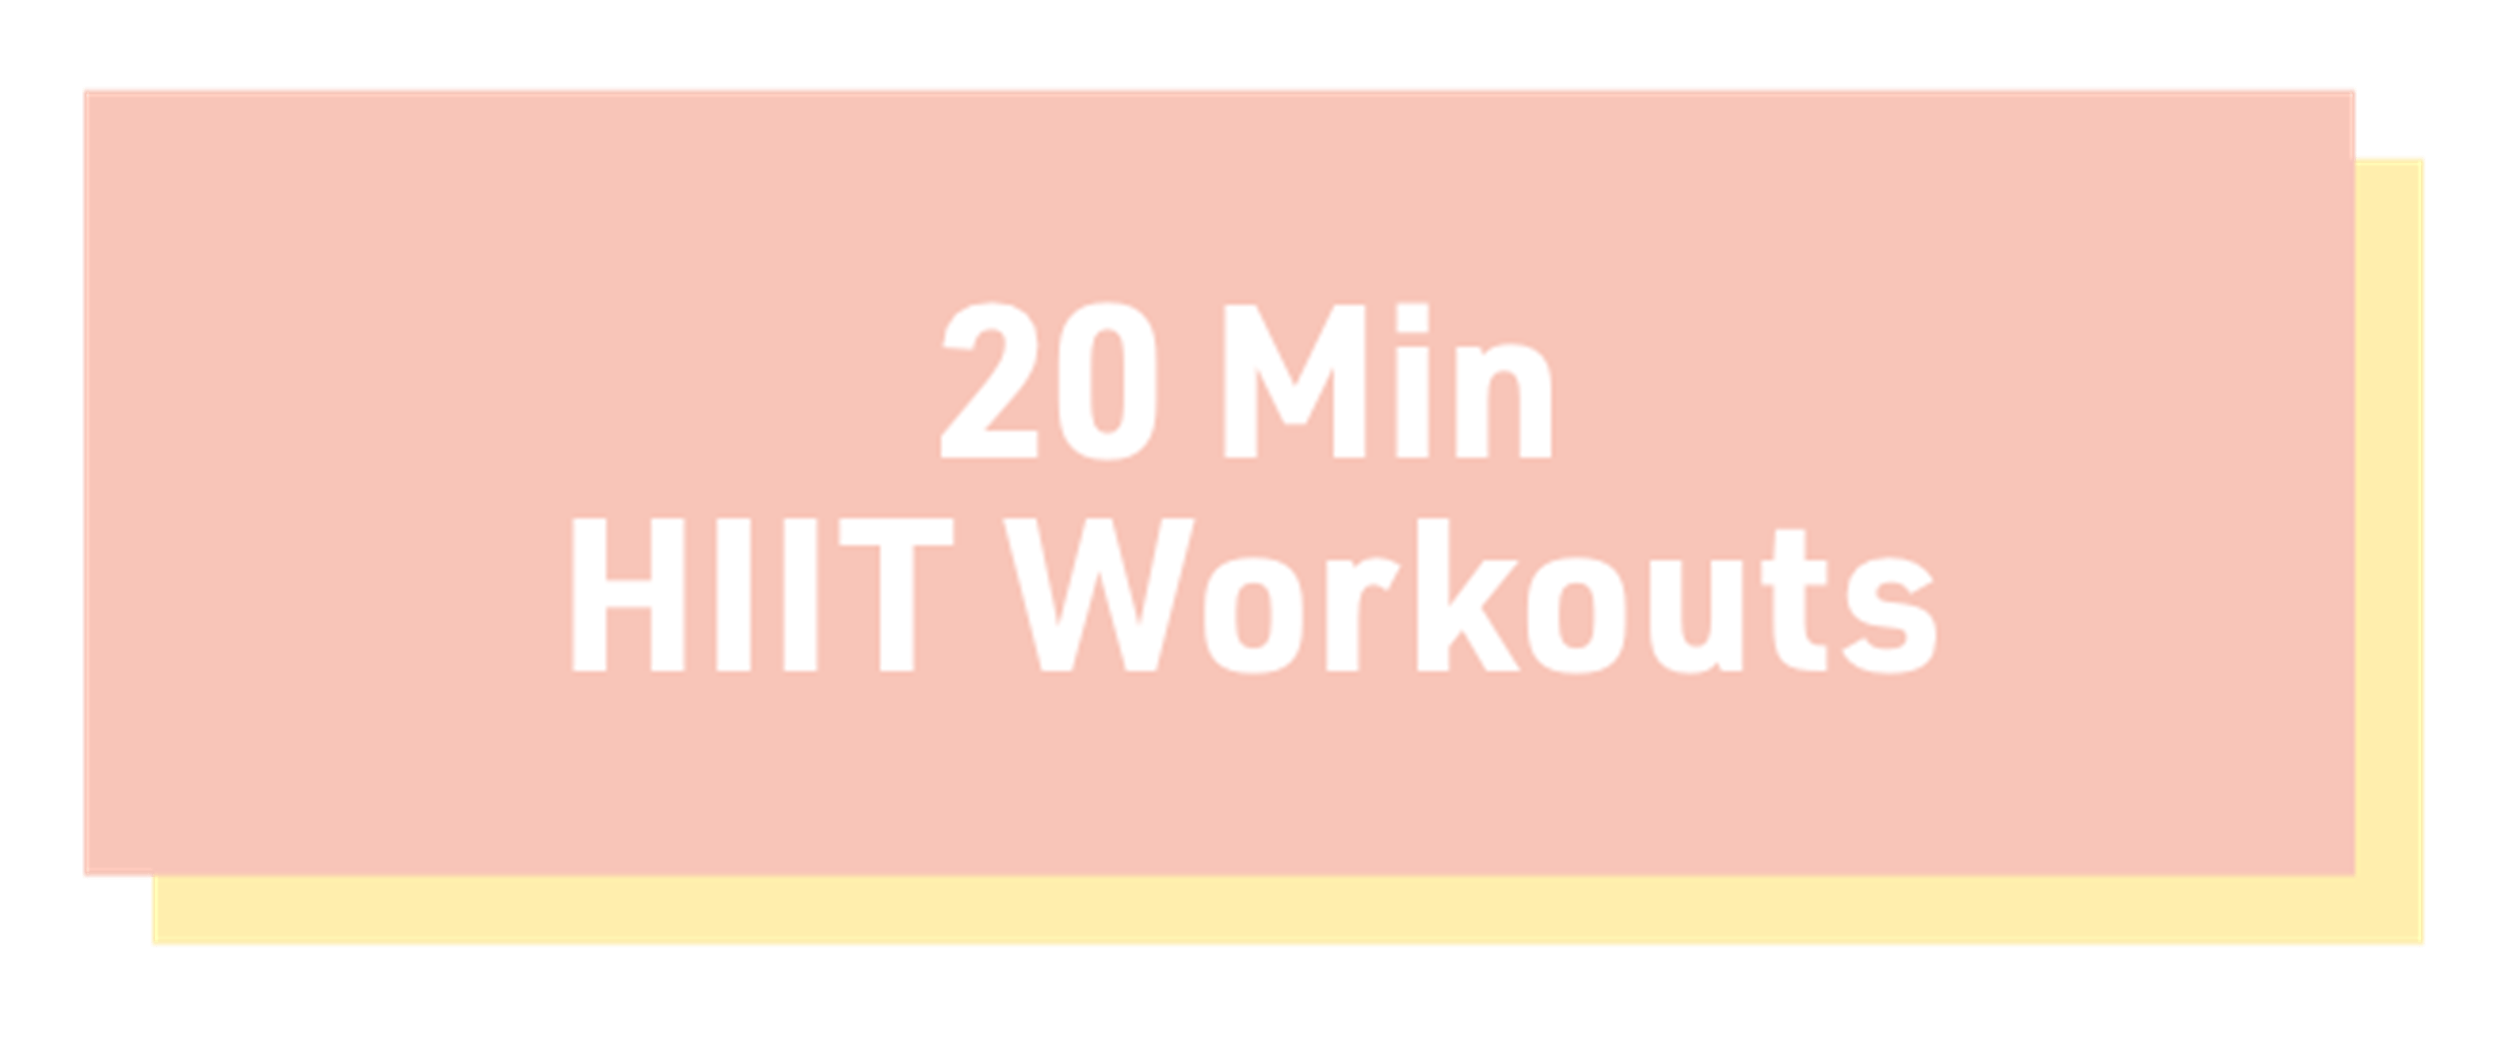 20 min HIIT workouts